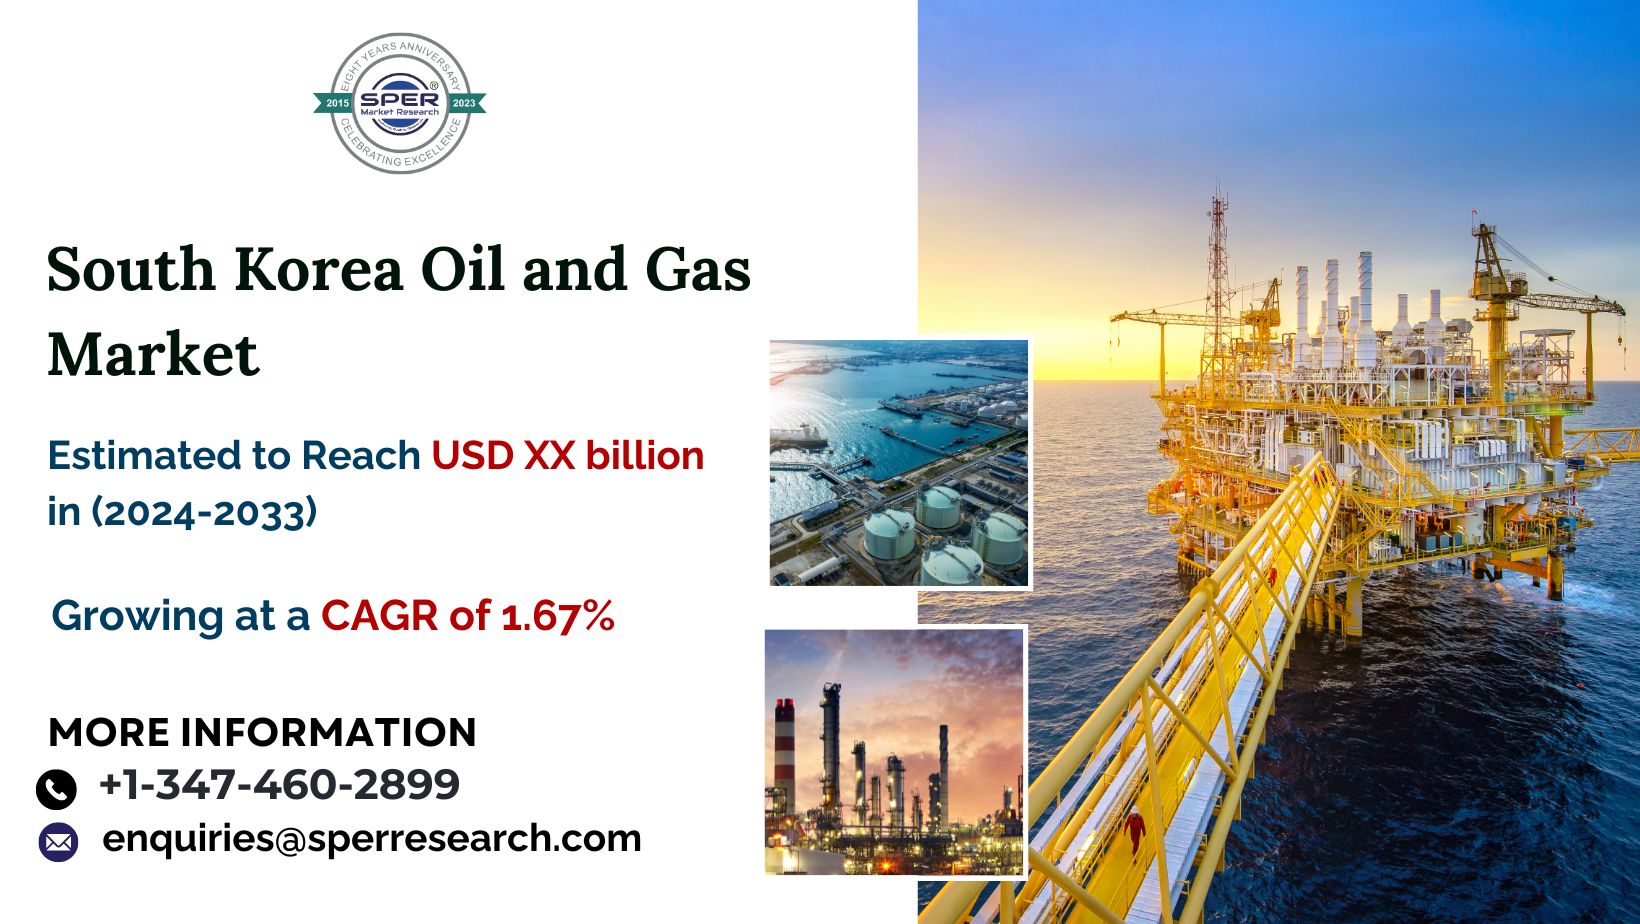 South Korea Oil & Gas Market Size, Growth, Share, Revenue, Upcoming Trends, Challenges, Business Opportunities and Forecast 2024-2033: SPER Market Research